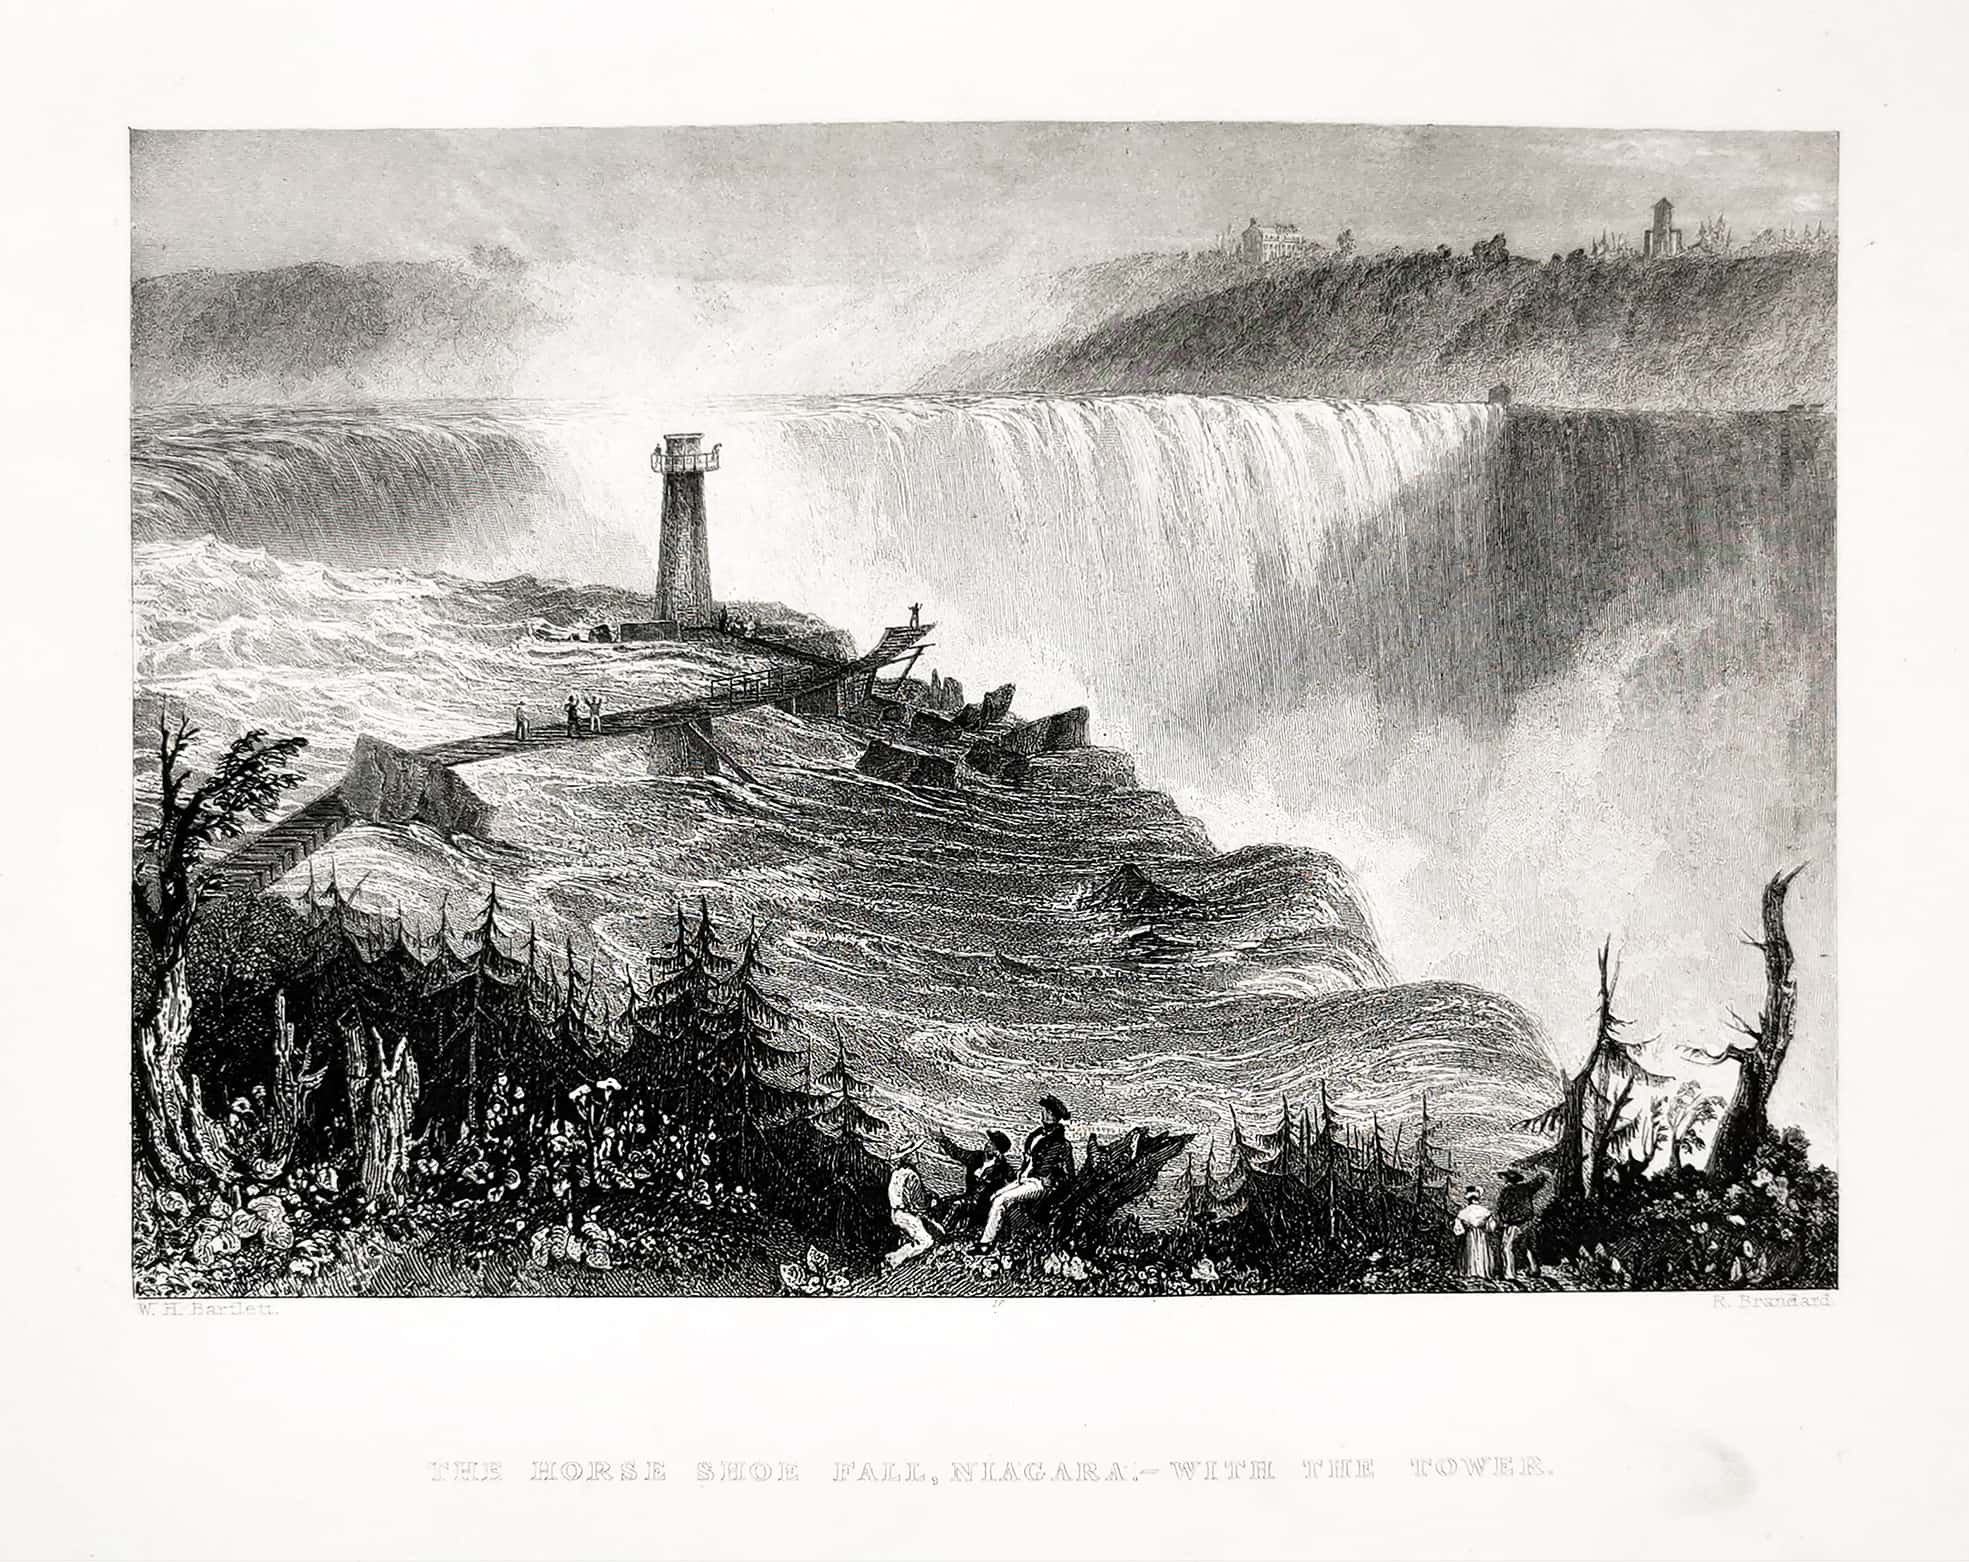 The Horse Shoe Fall, Niagara. - With the Tower. - Antique Print from 1845